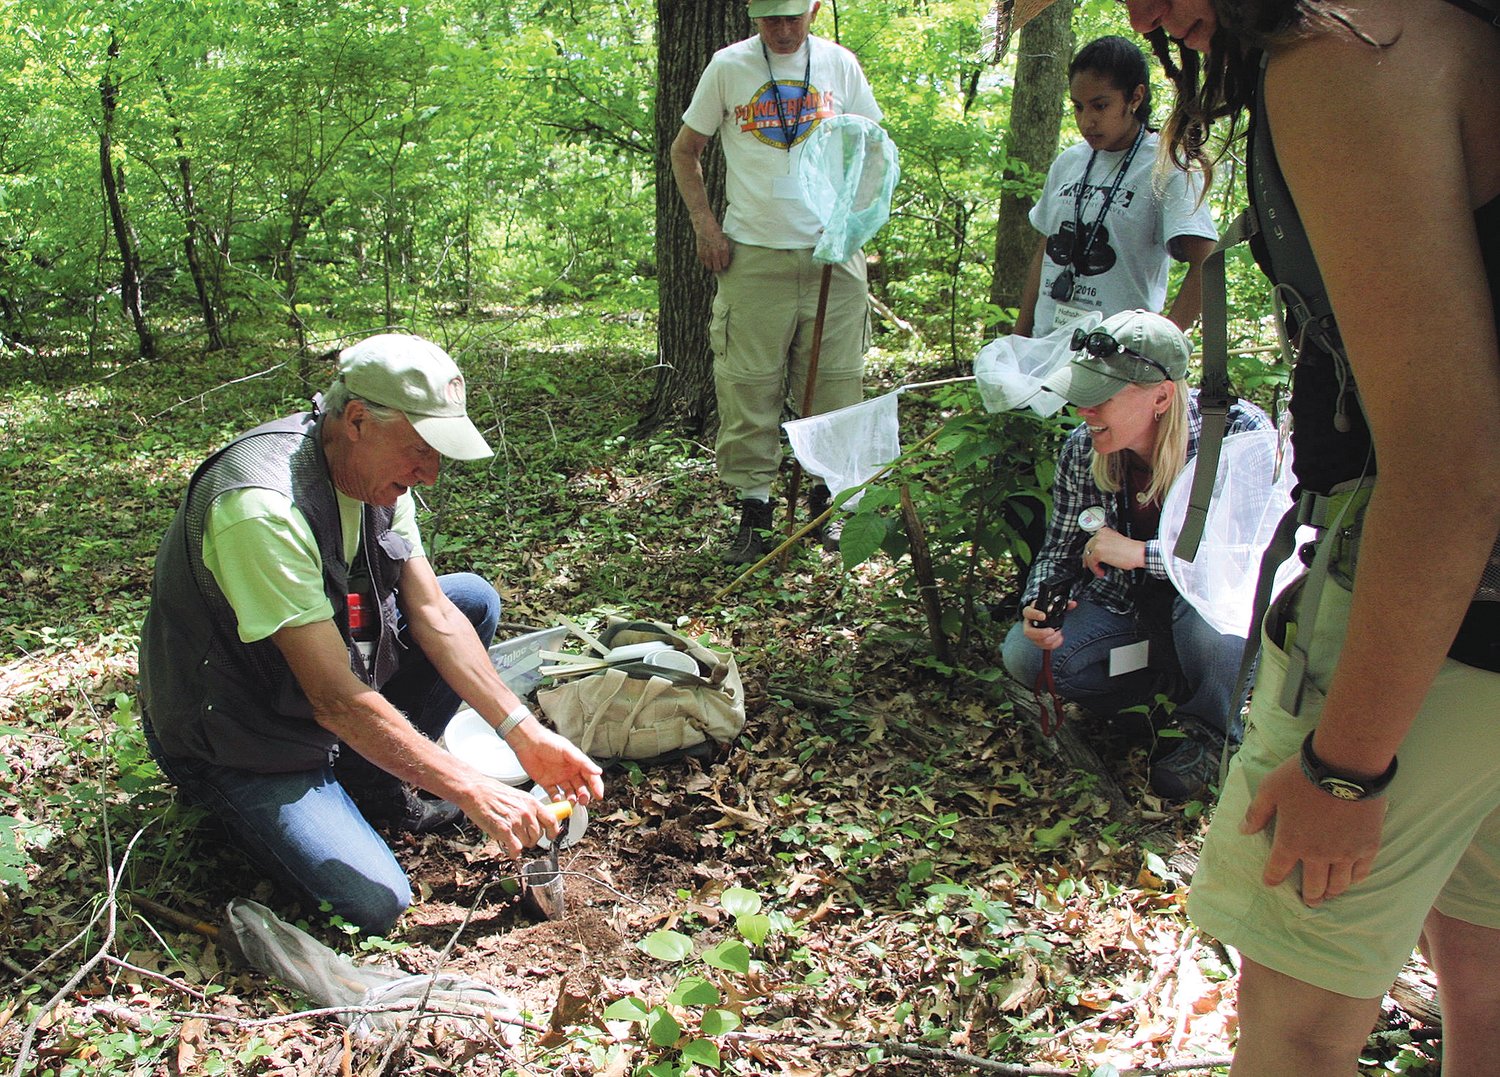 Beetle team leader Raul Ferreira of Pawcatuck demonstrated different beetle catching techniques to beginning bioblitzers at the 2016 BioBlitz in Hopkinton.